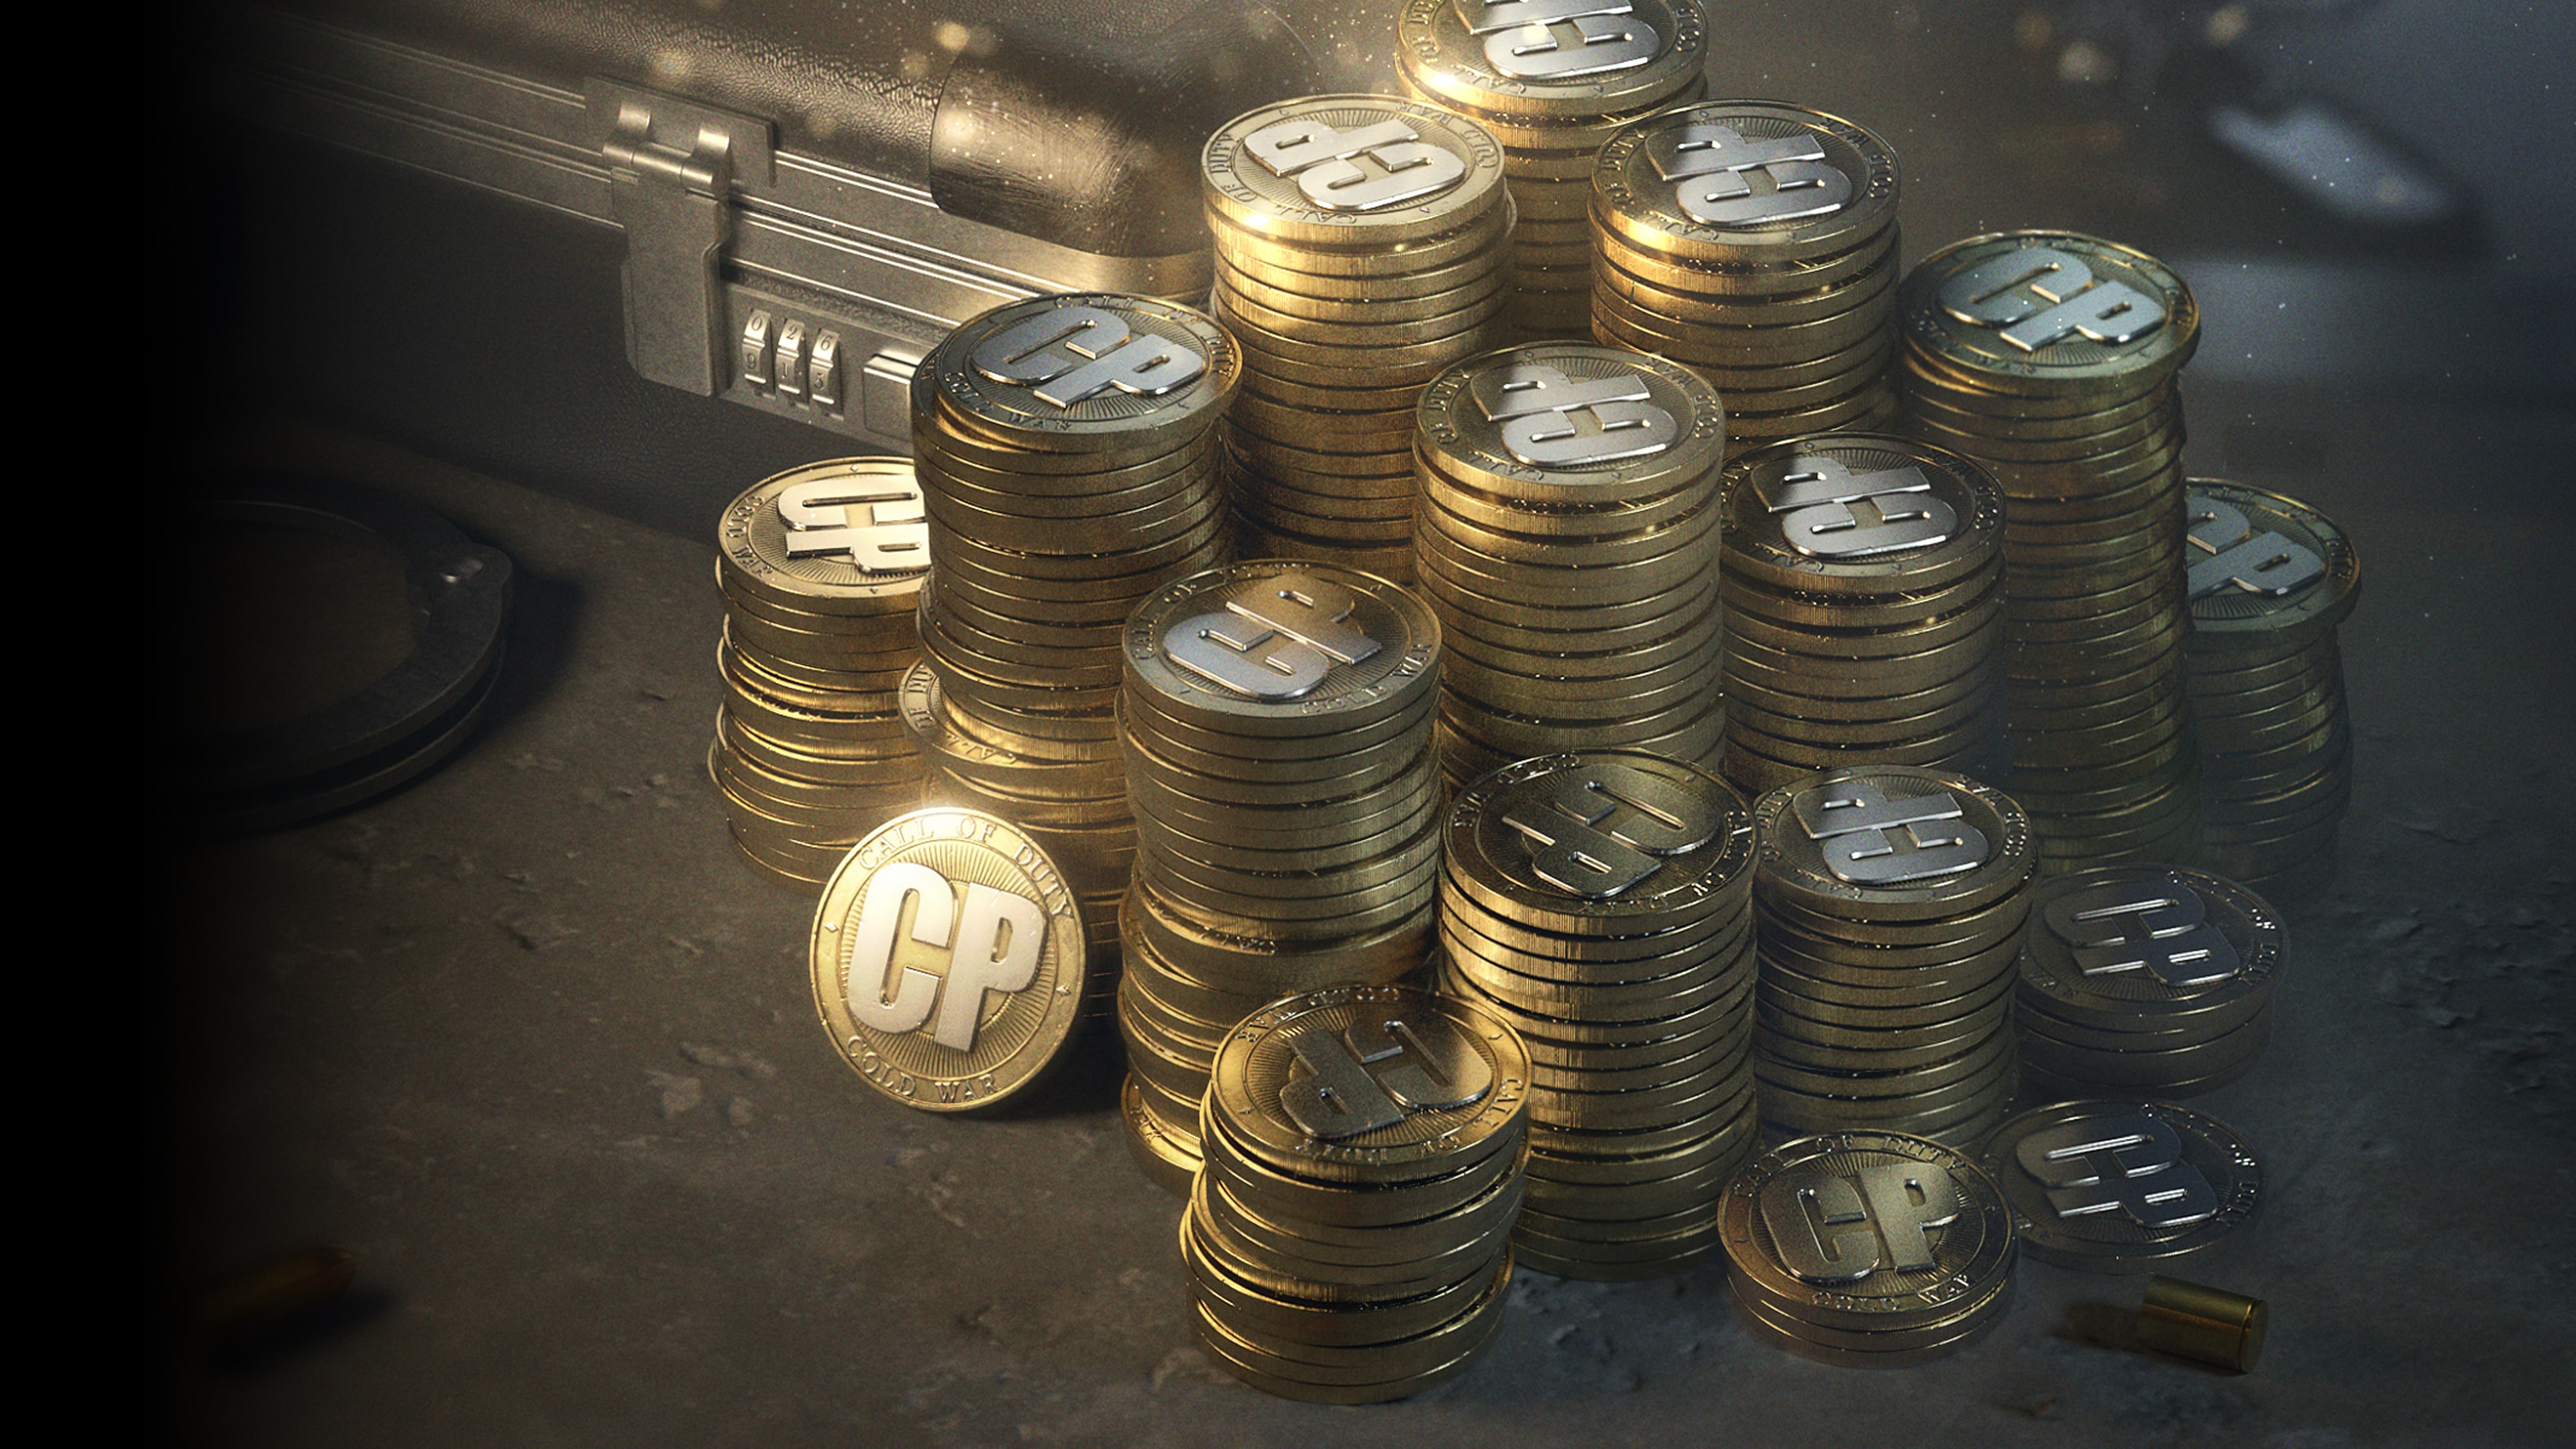 21.000 Call of Duty®: Black Ops Cold War Points